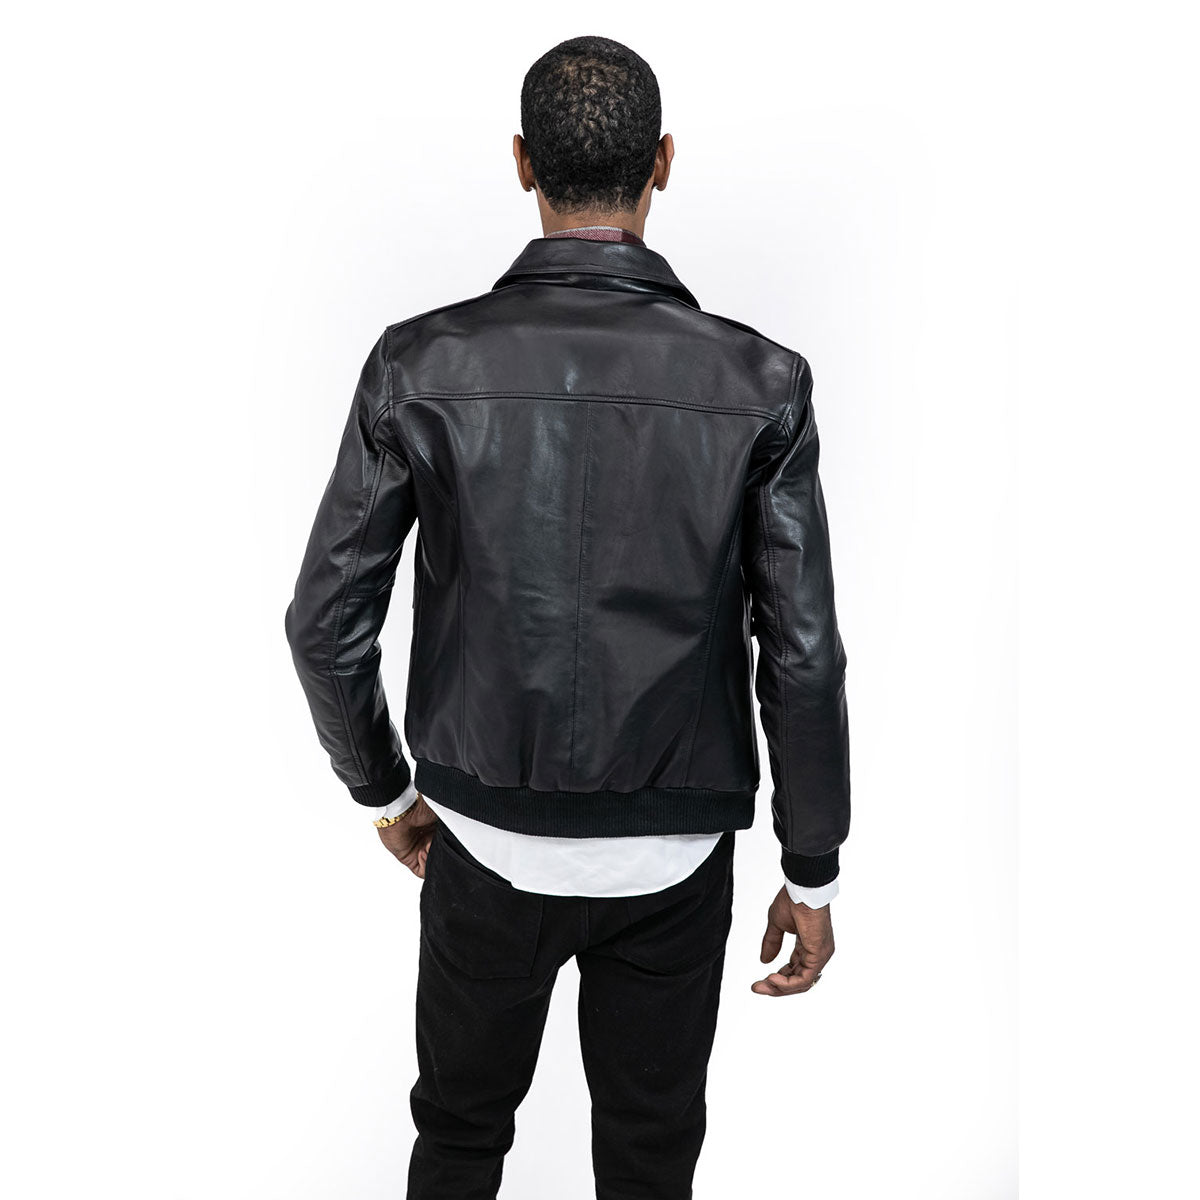 A-2 Bomber Jacket leather 